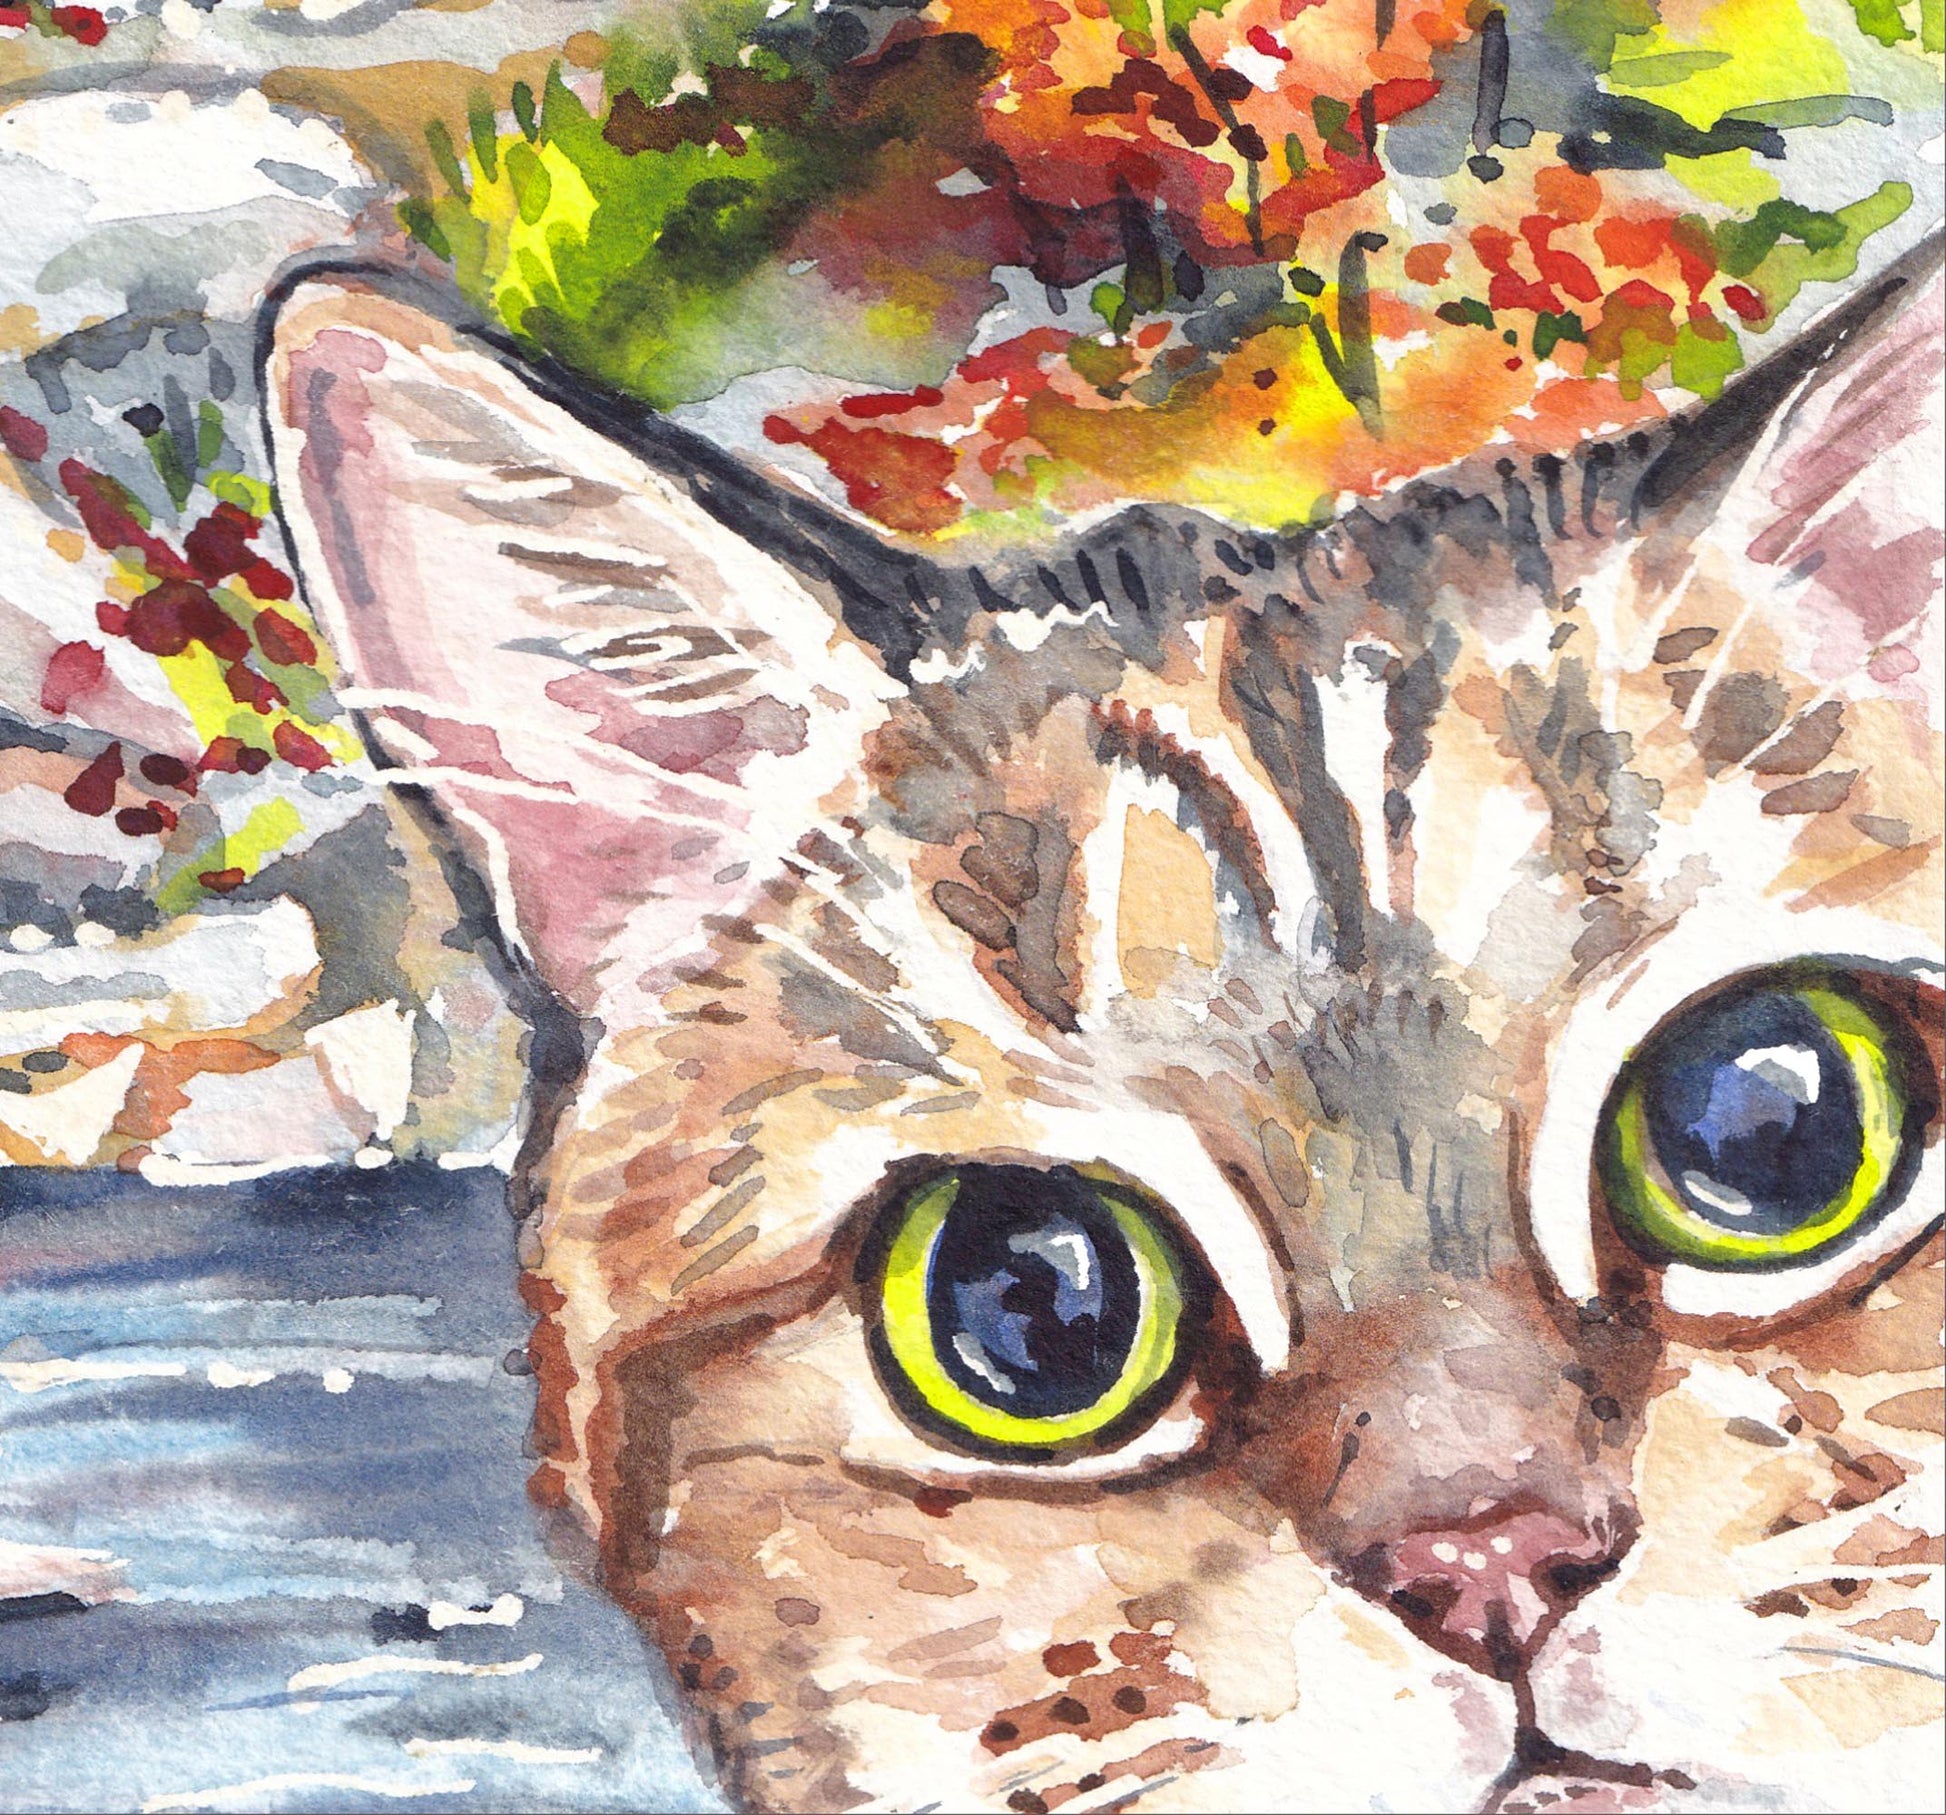 Watercolour painting of a cat photobombing a photo of an Ontario landscape. Art by Deidre Wicks